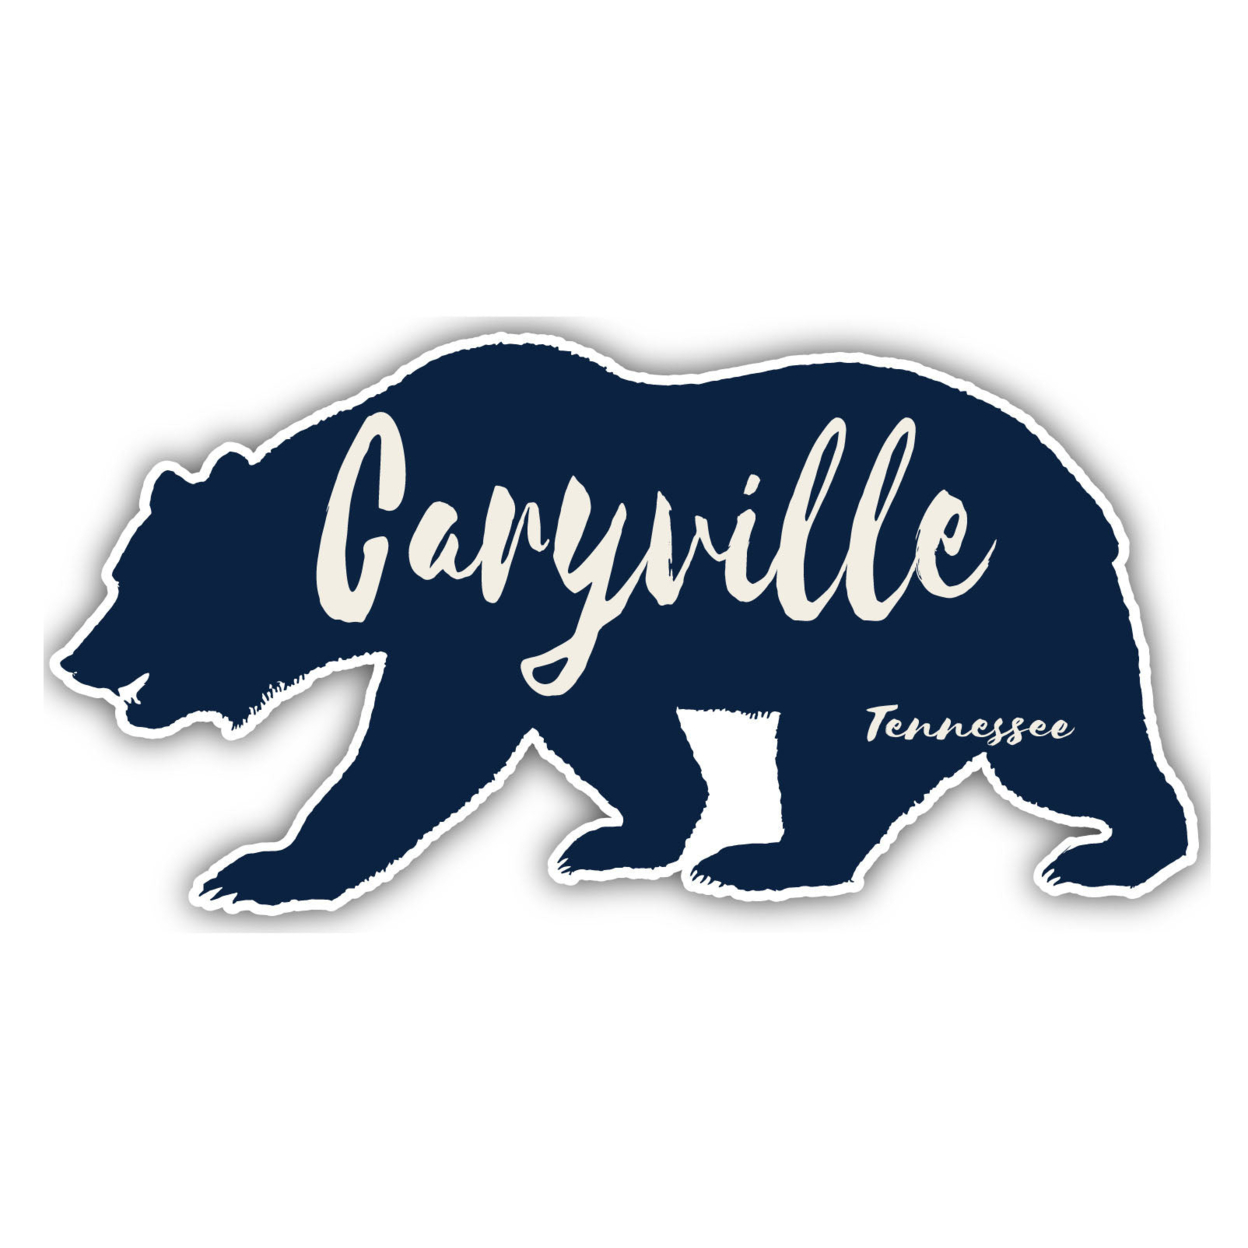 Caryville Tennessee Souvenir Decorative Stickers (Choose Theme And Size) - Single Unit, 2-Inch, Bear